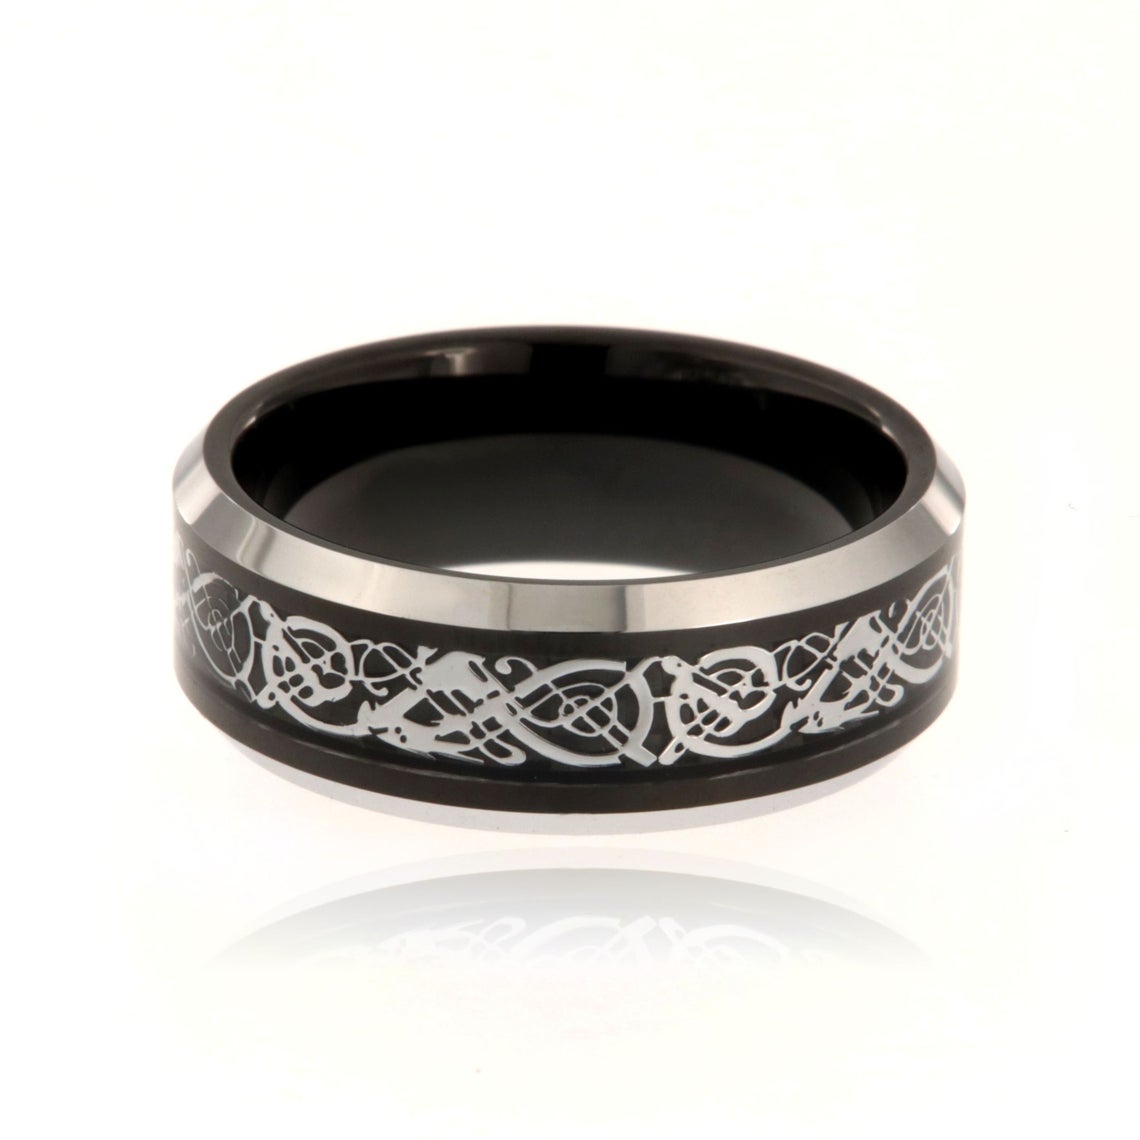 8mm wide tungsten ring with Celtic earth design and beveled edges